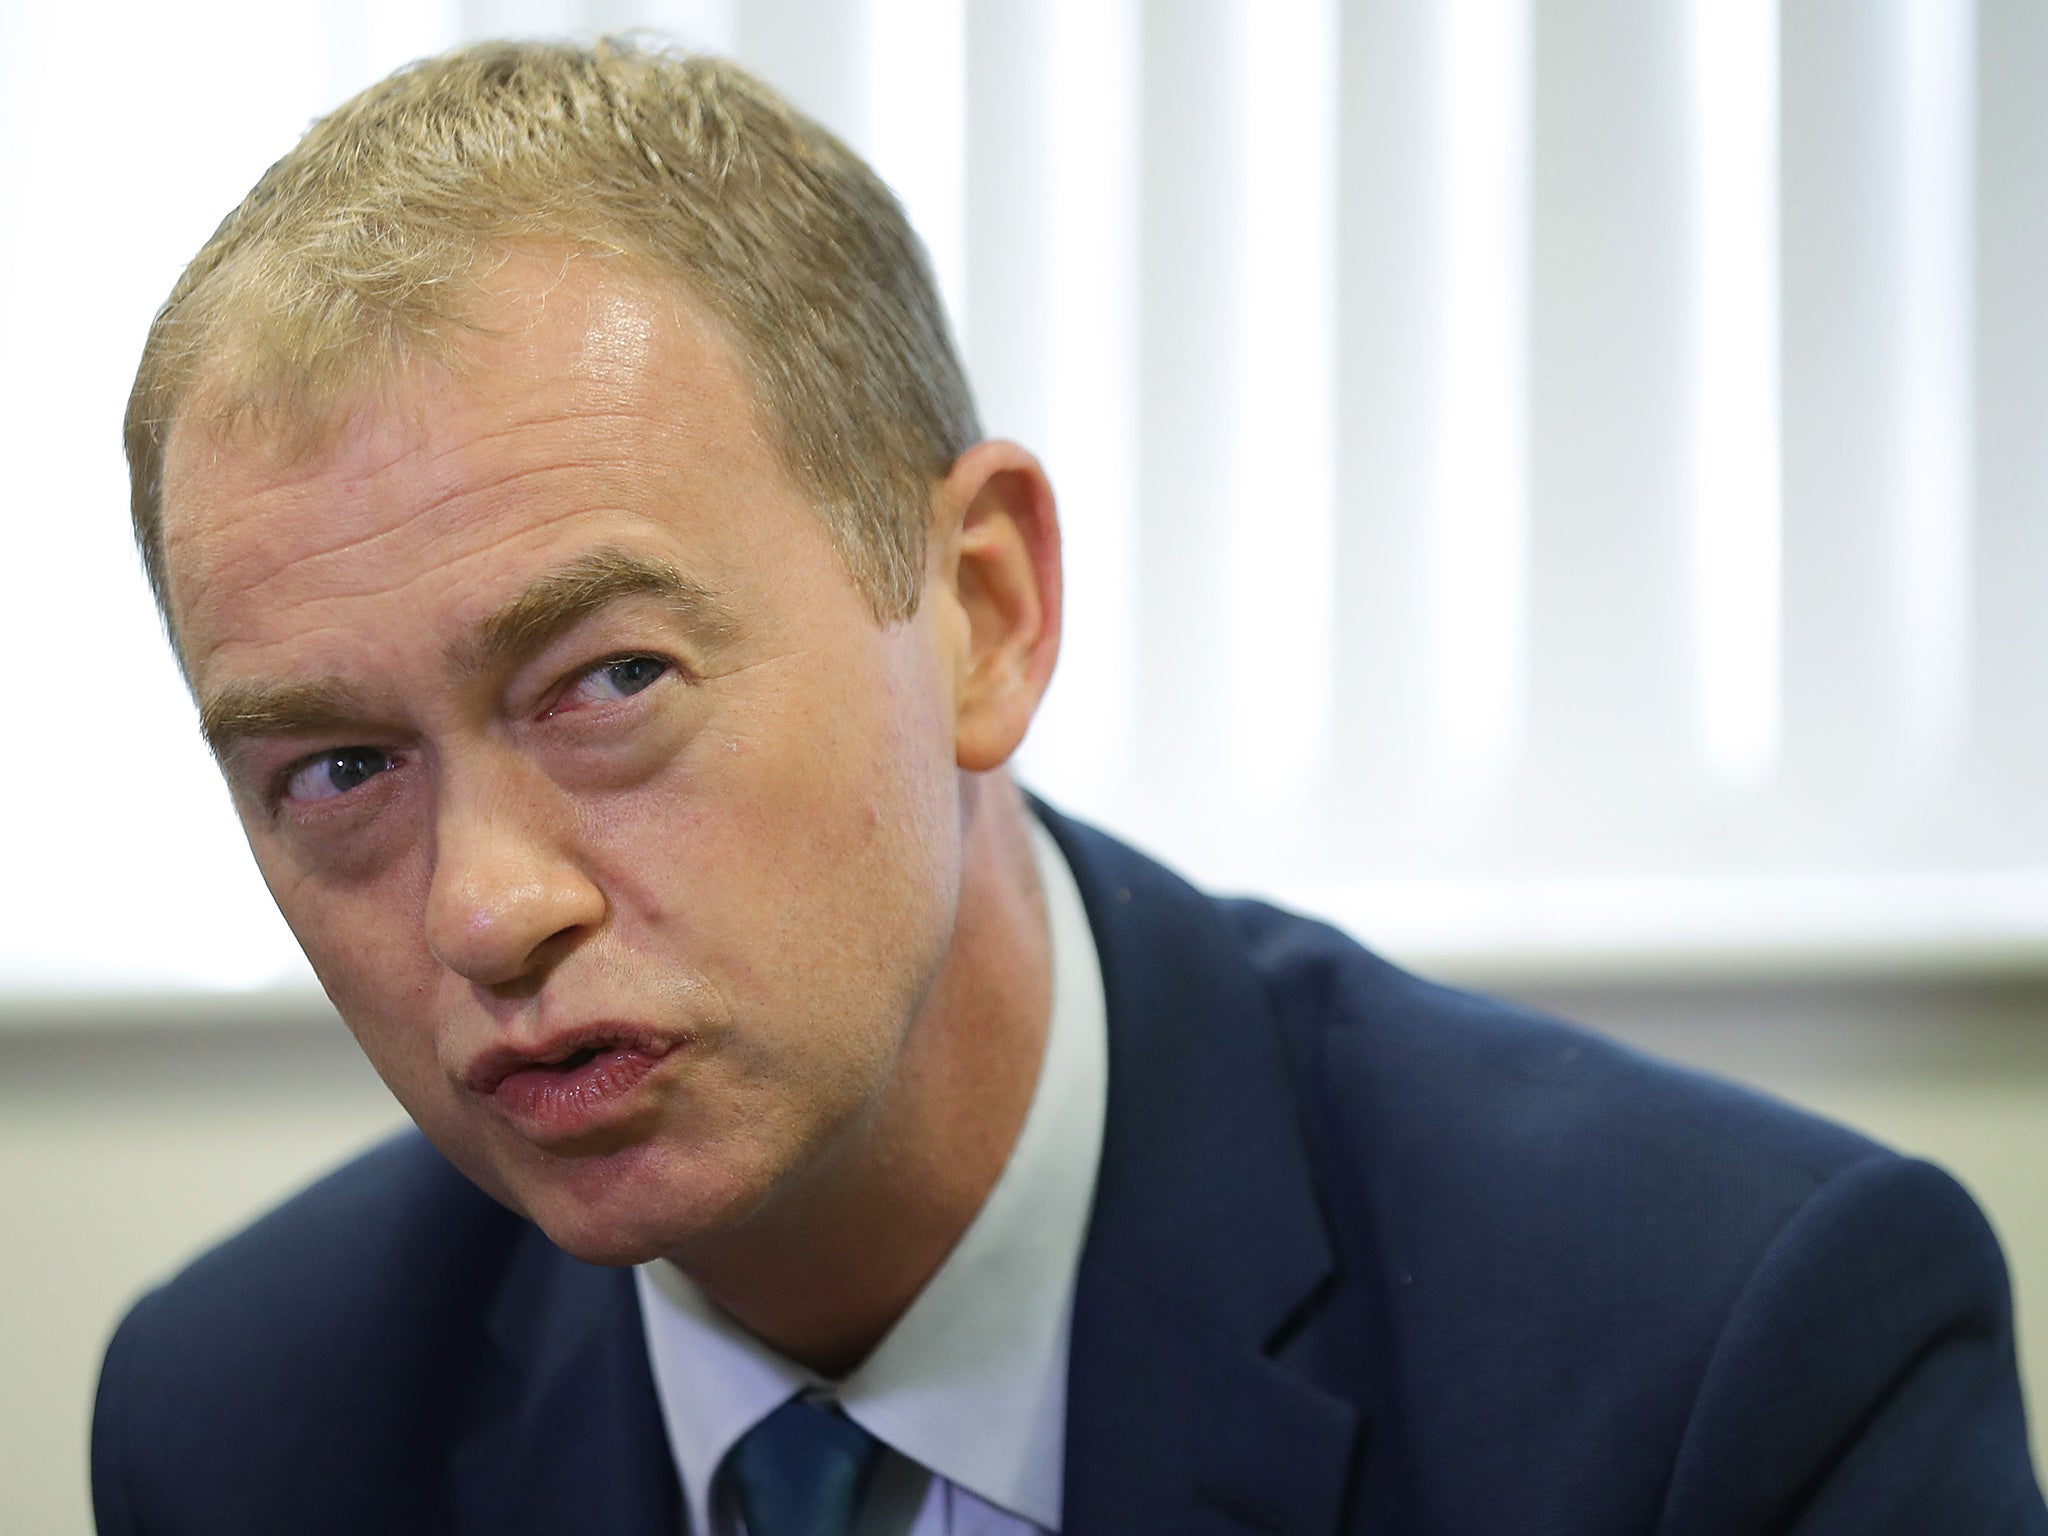 Many predicted that Tim Farron’s party would benefit greatly from its firm anti-Brexit stance; this appears not to be happening